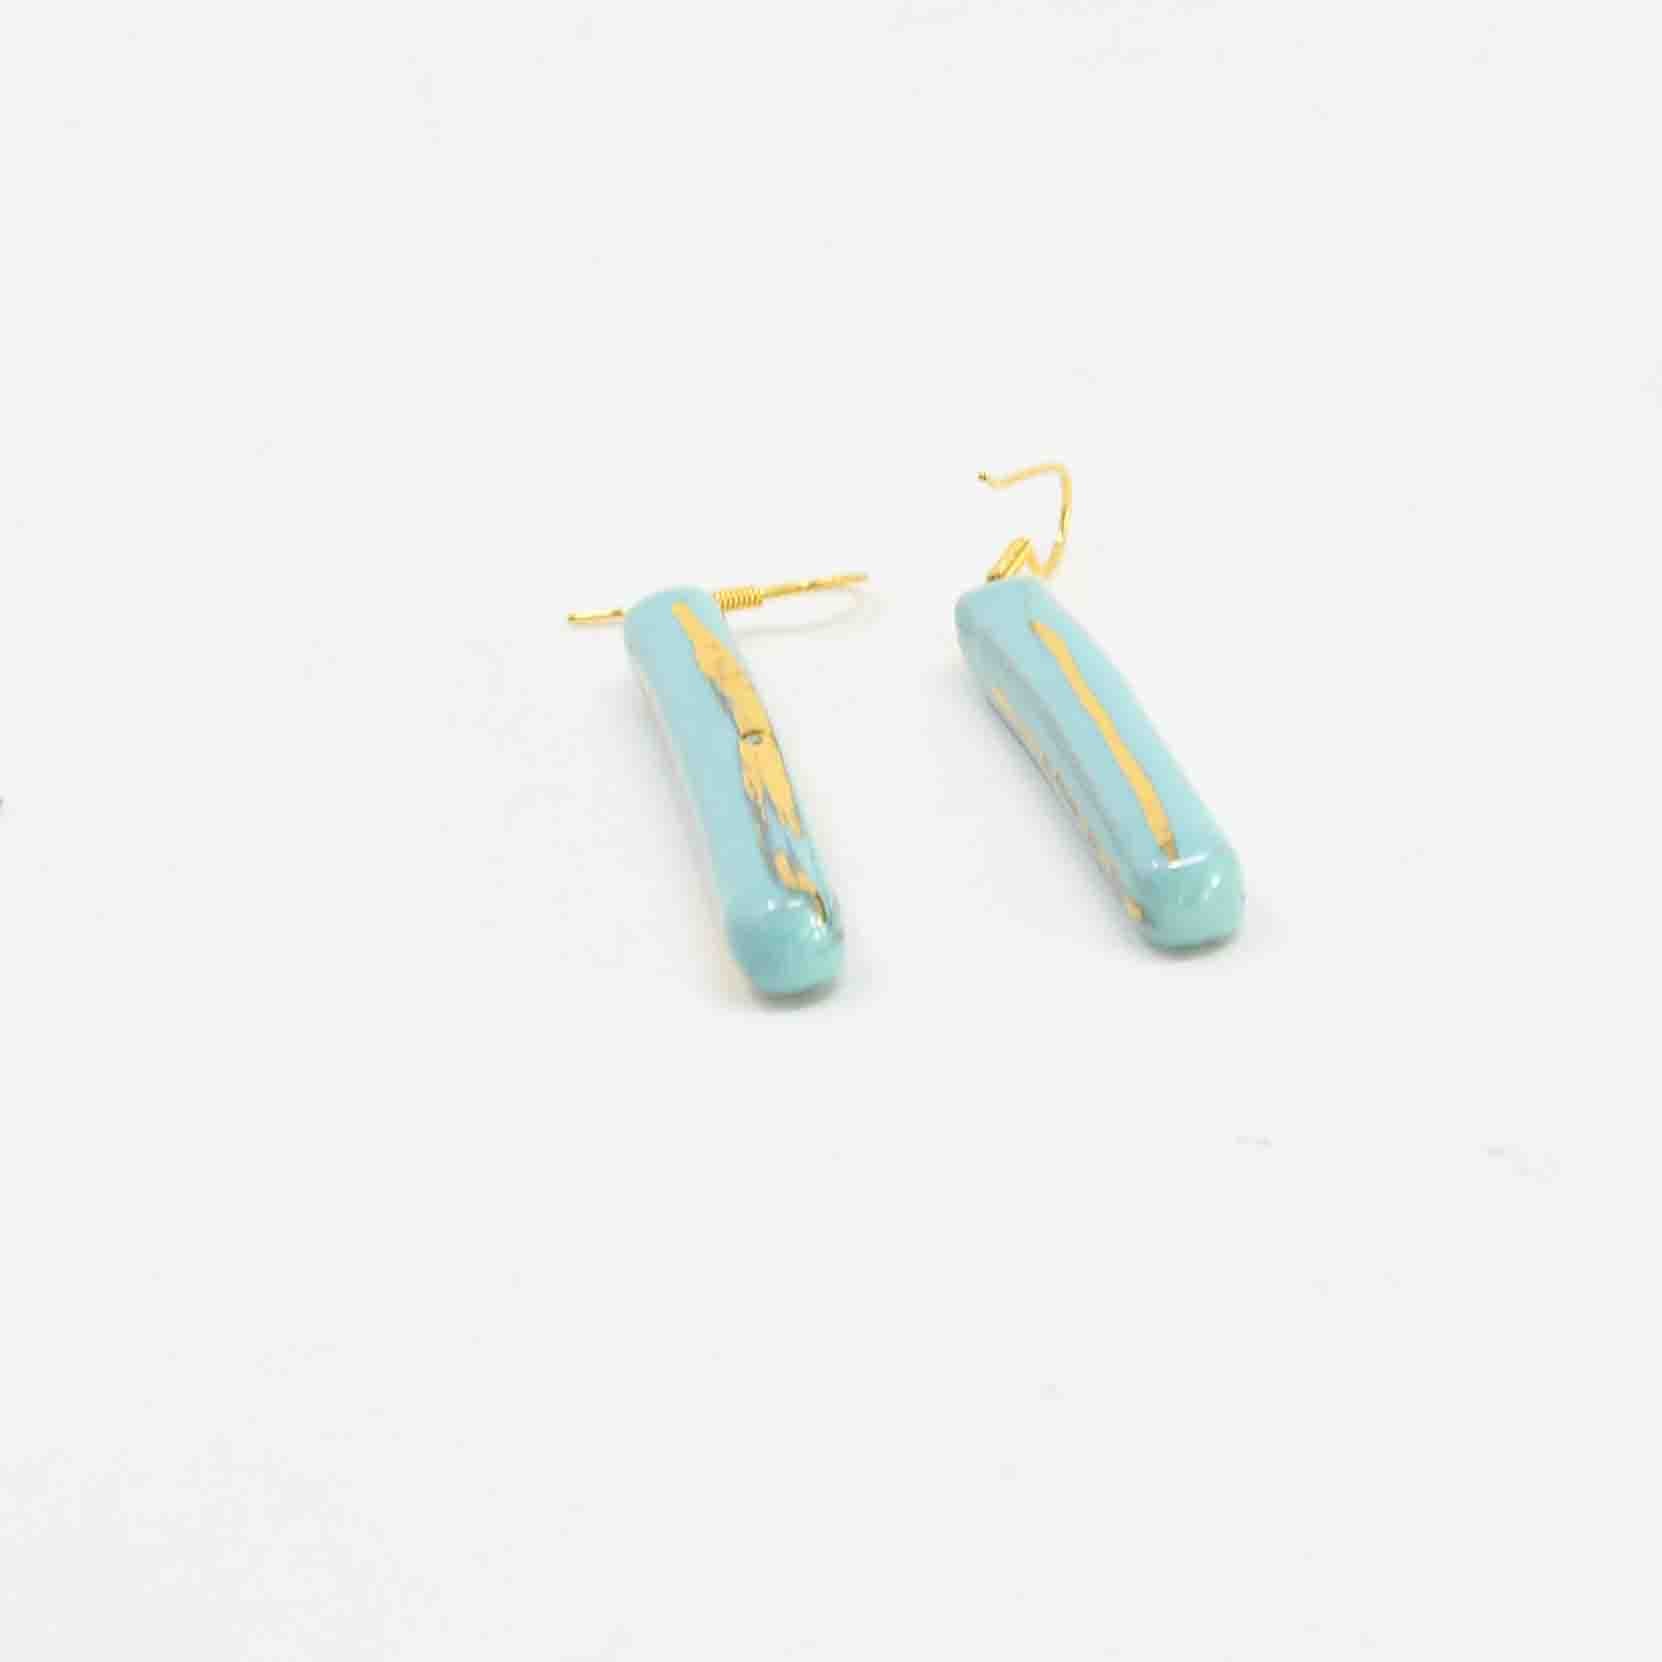 Earrings in ceramic and gold